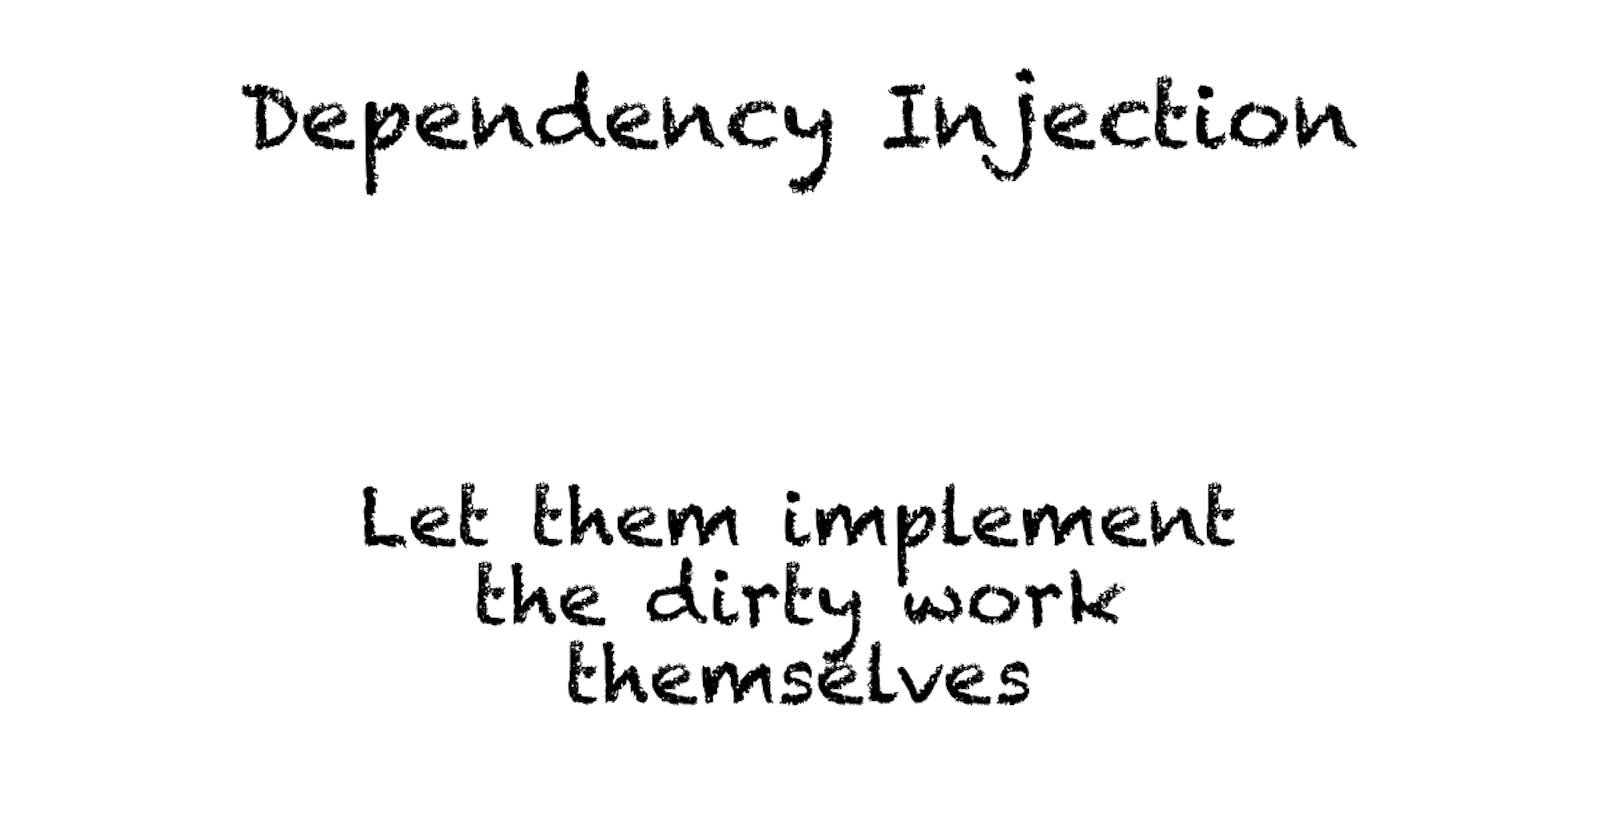 DI - Dependency Injection